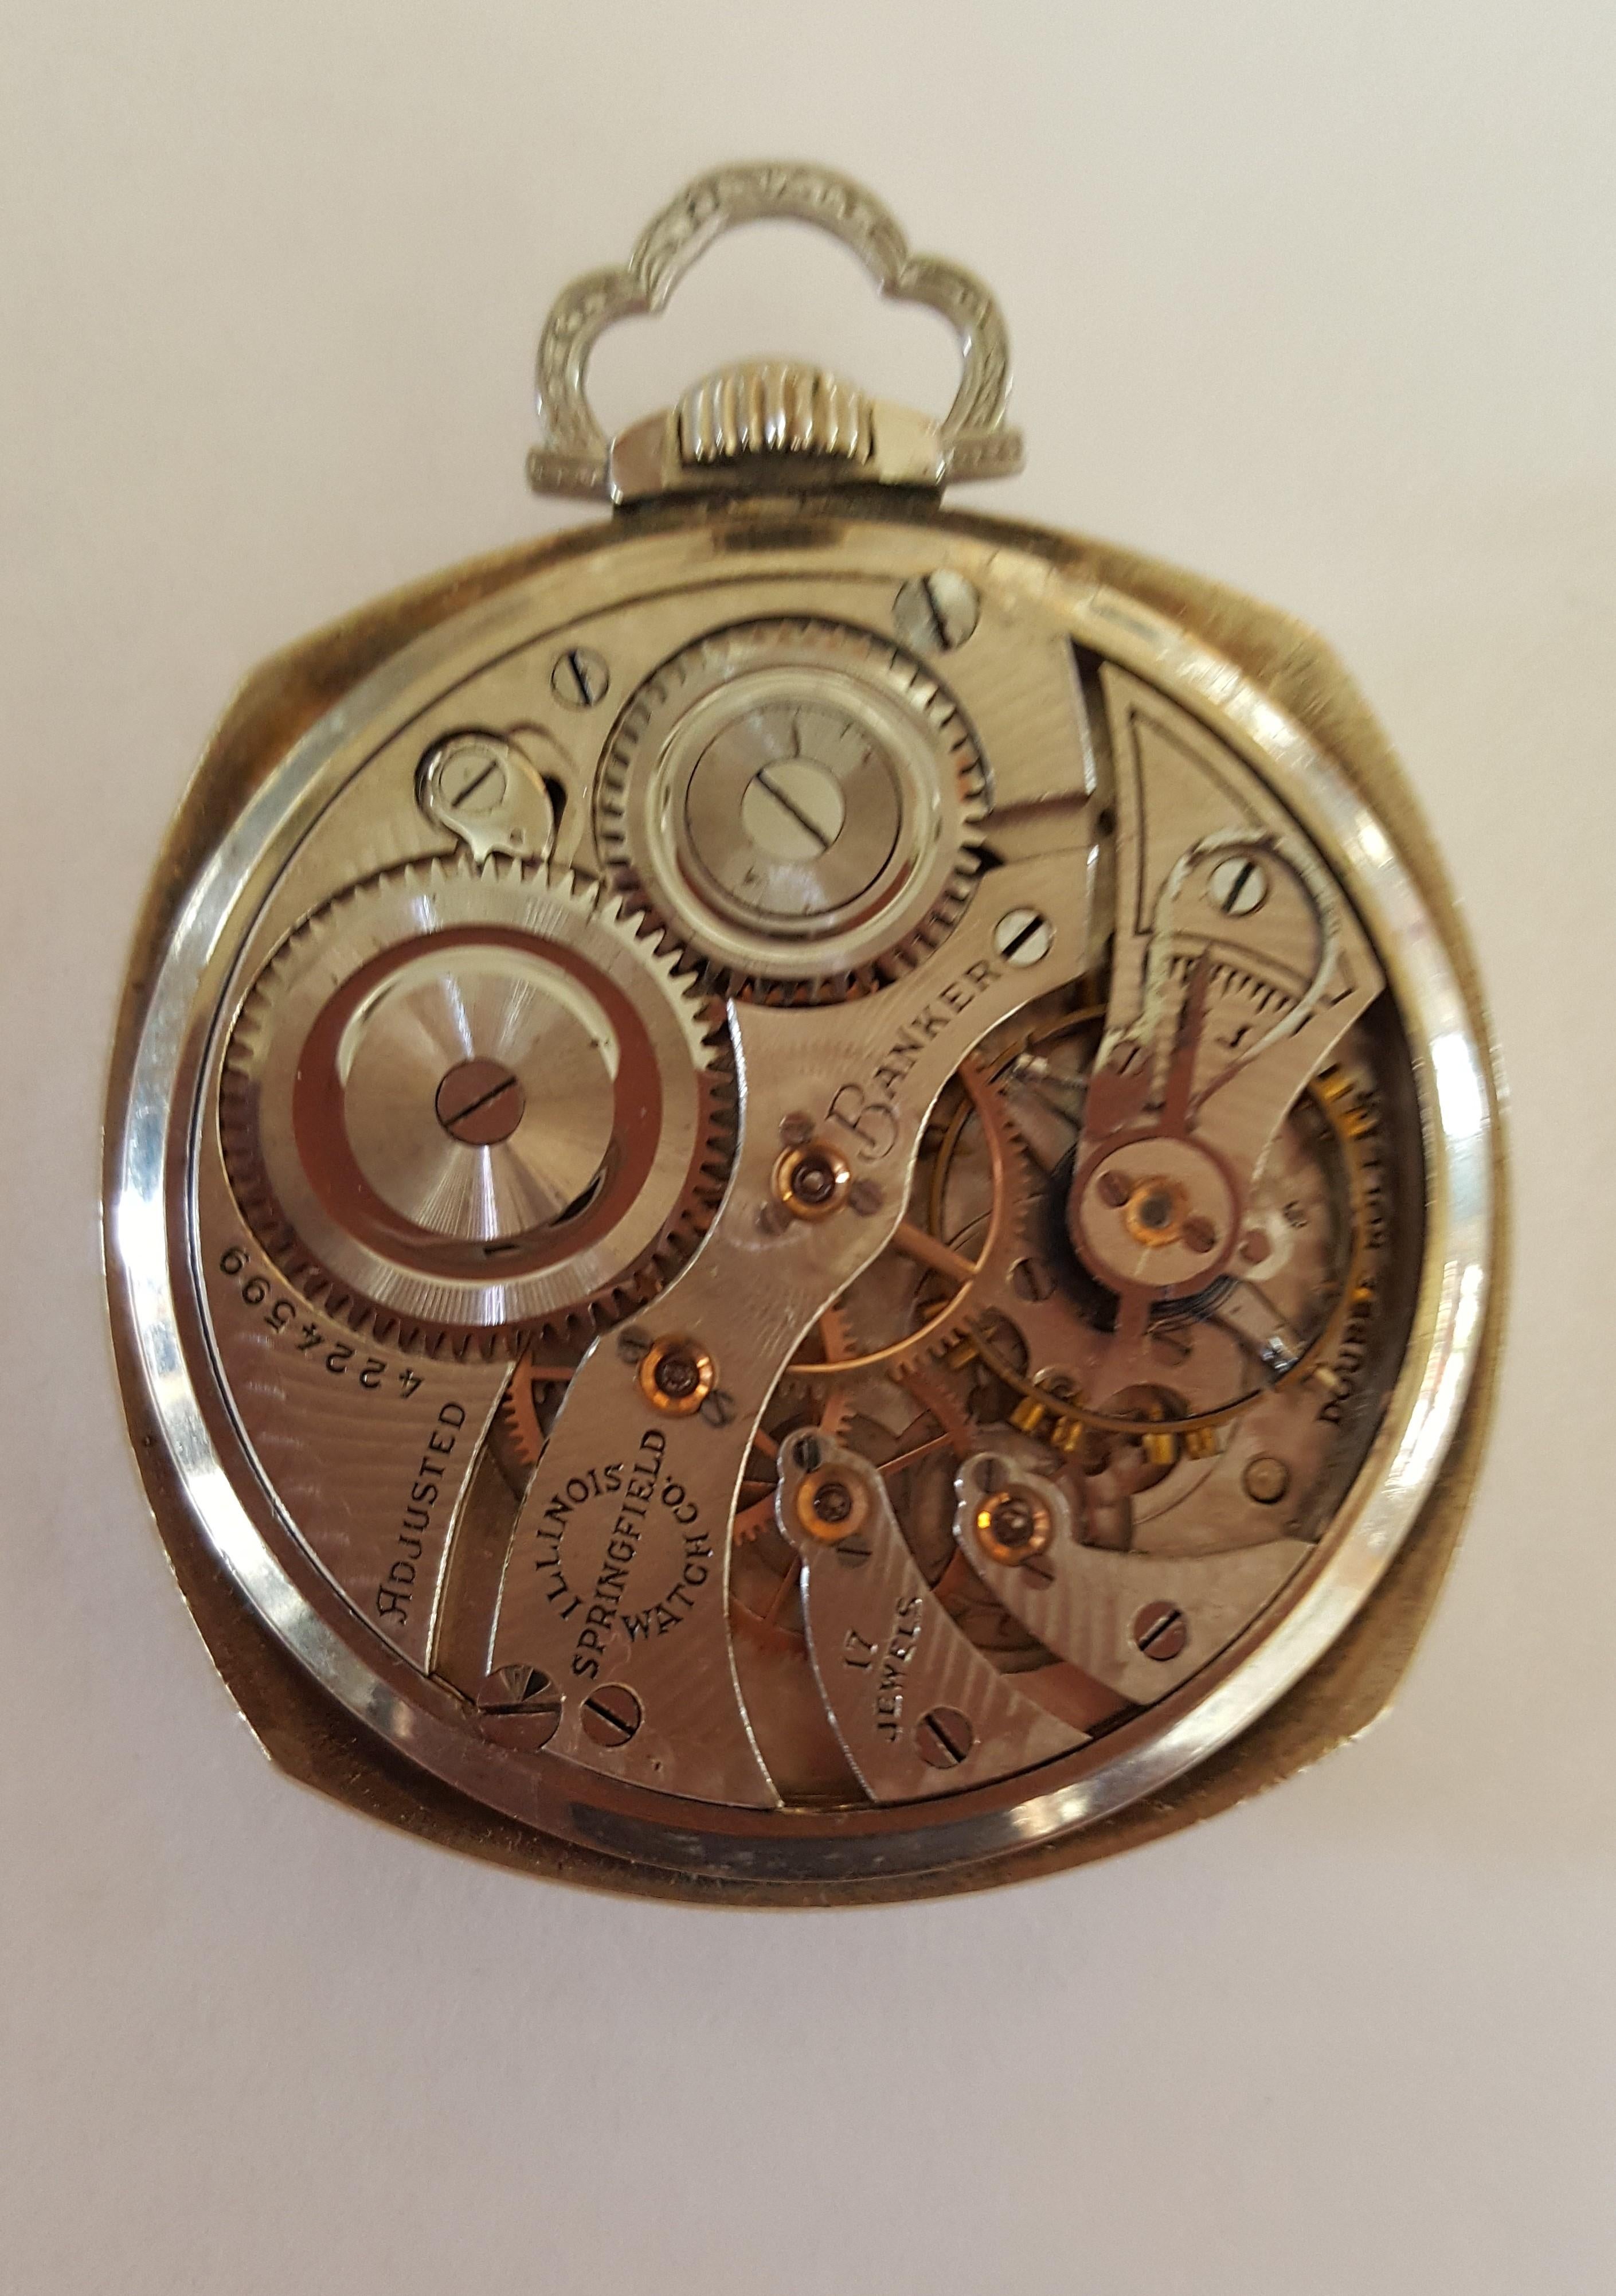 1923 Illinois Pocket Watch, Banker, 14k White Gold Filled, Working, 12s Size, 17 Jewel, Openface, Squared Case, 43 mm Case, Adjusted. Beautiful engraved design. Black Arabic Numerals, Chronograph, Acrylic clear cover.

This watch has not been